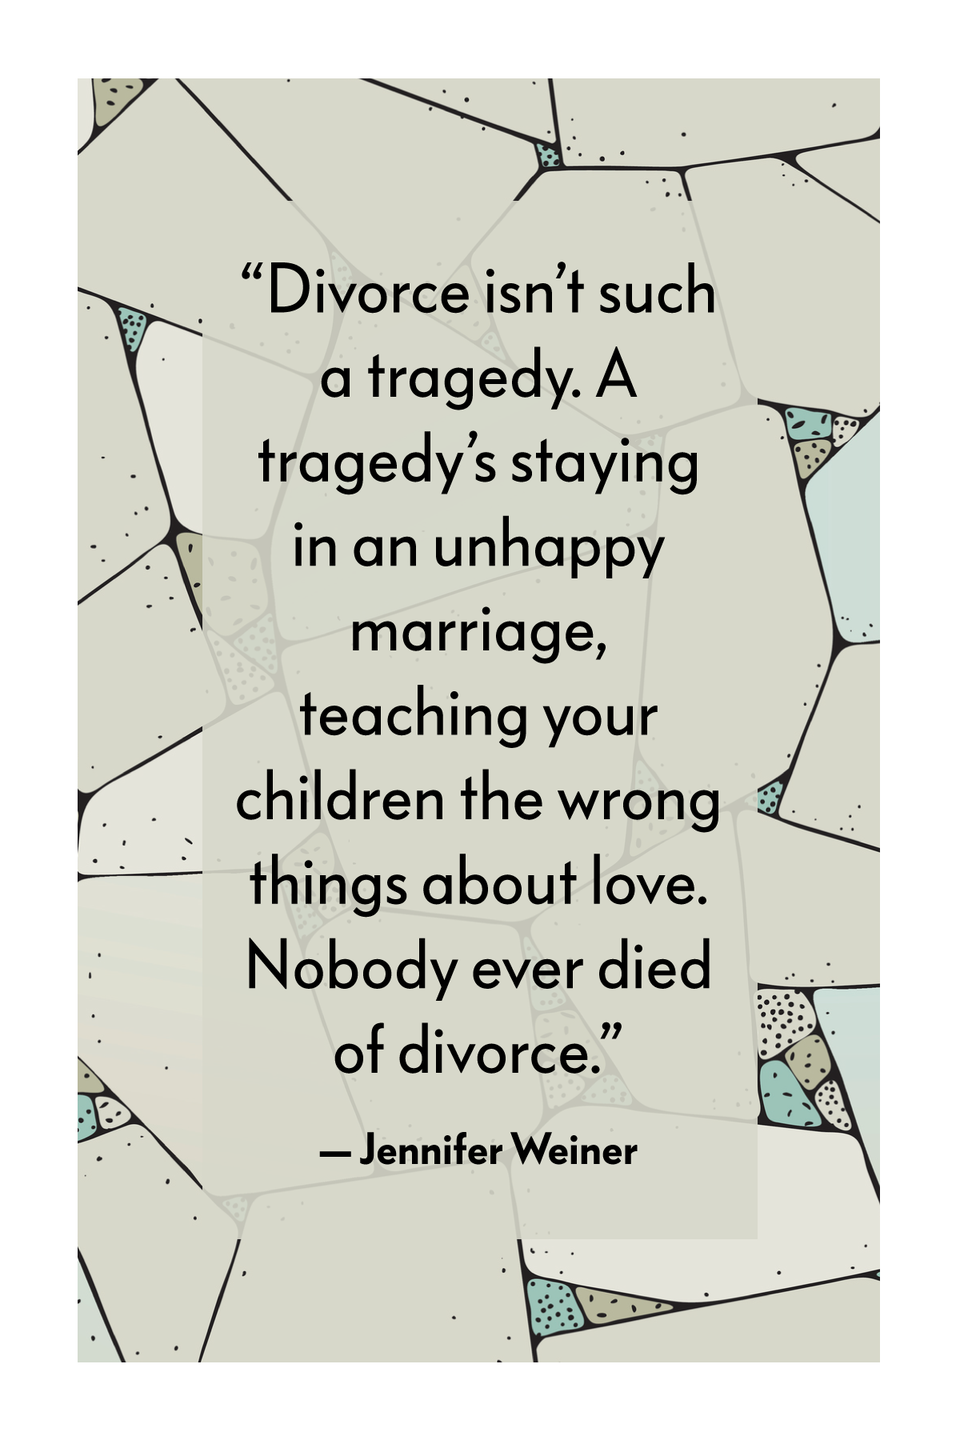 35 Empowering Quotes About Divorce to Help You Get Through